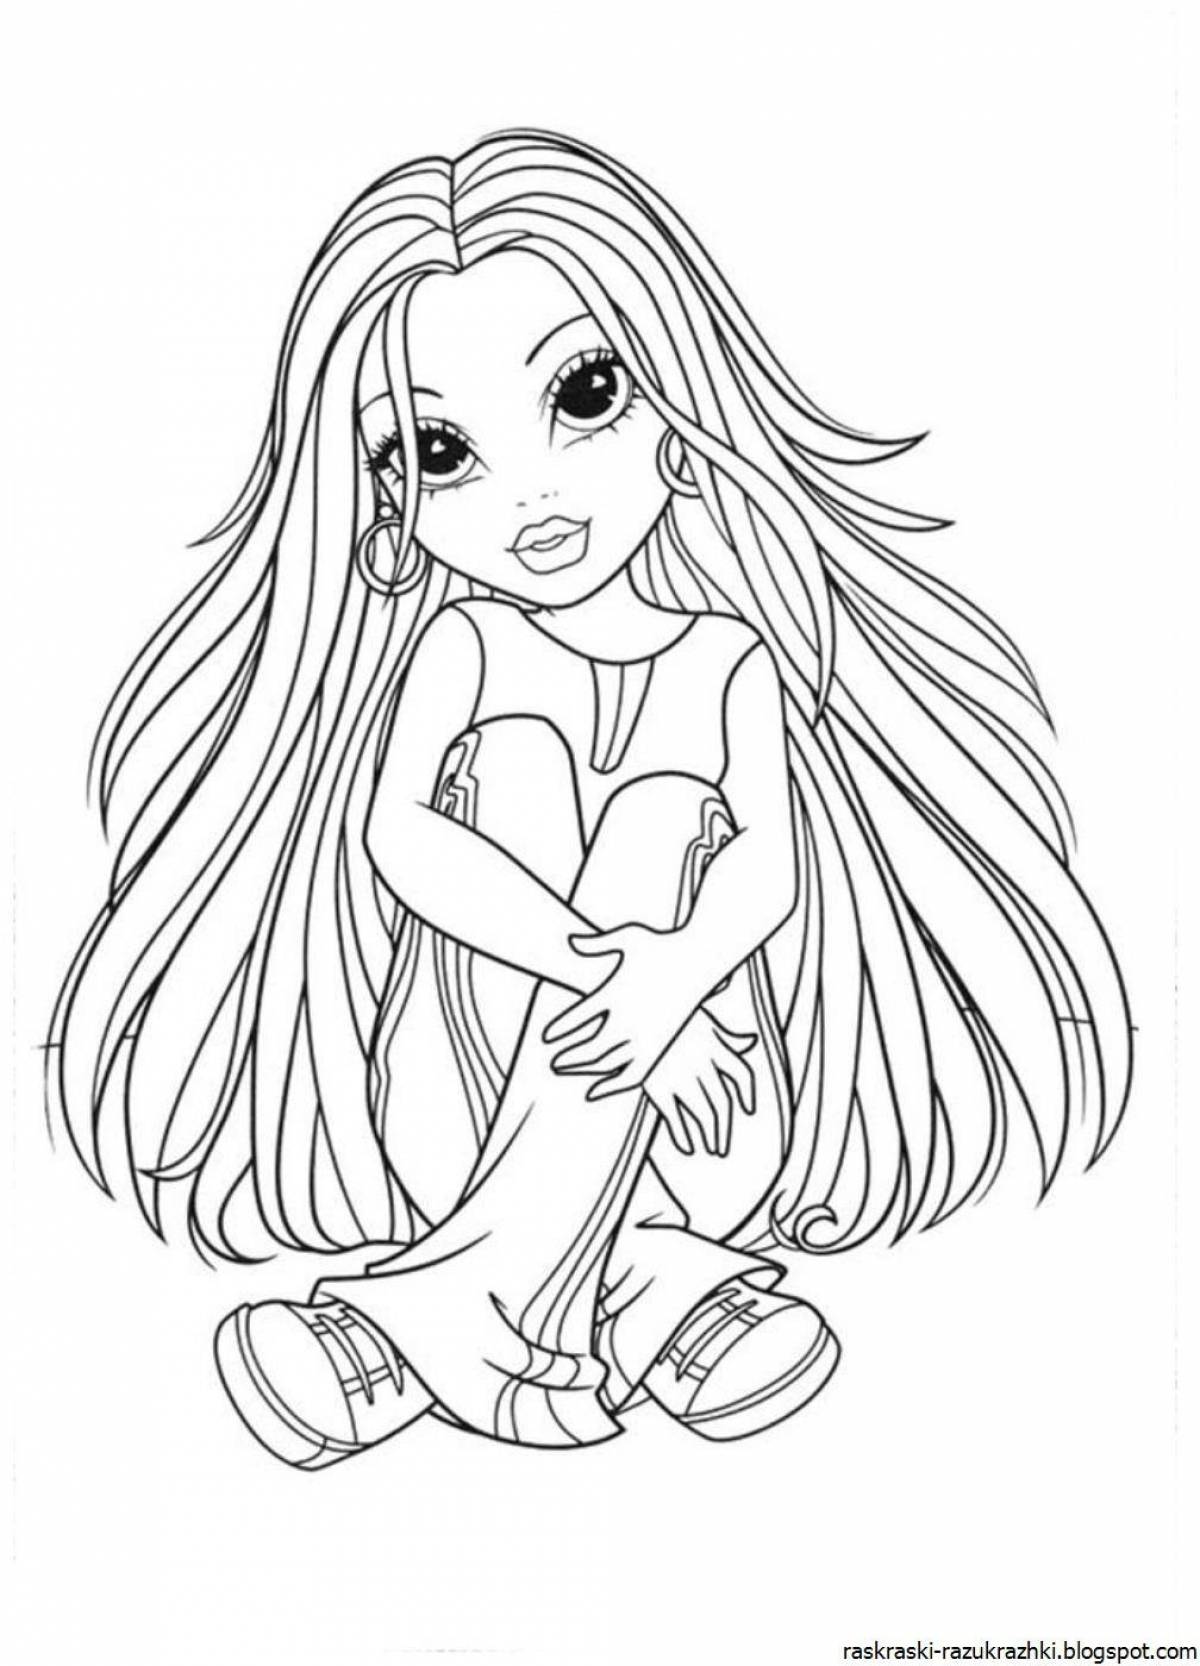 Awesome coloring pages popular